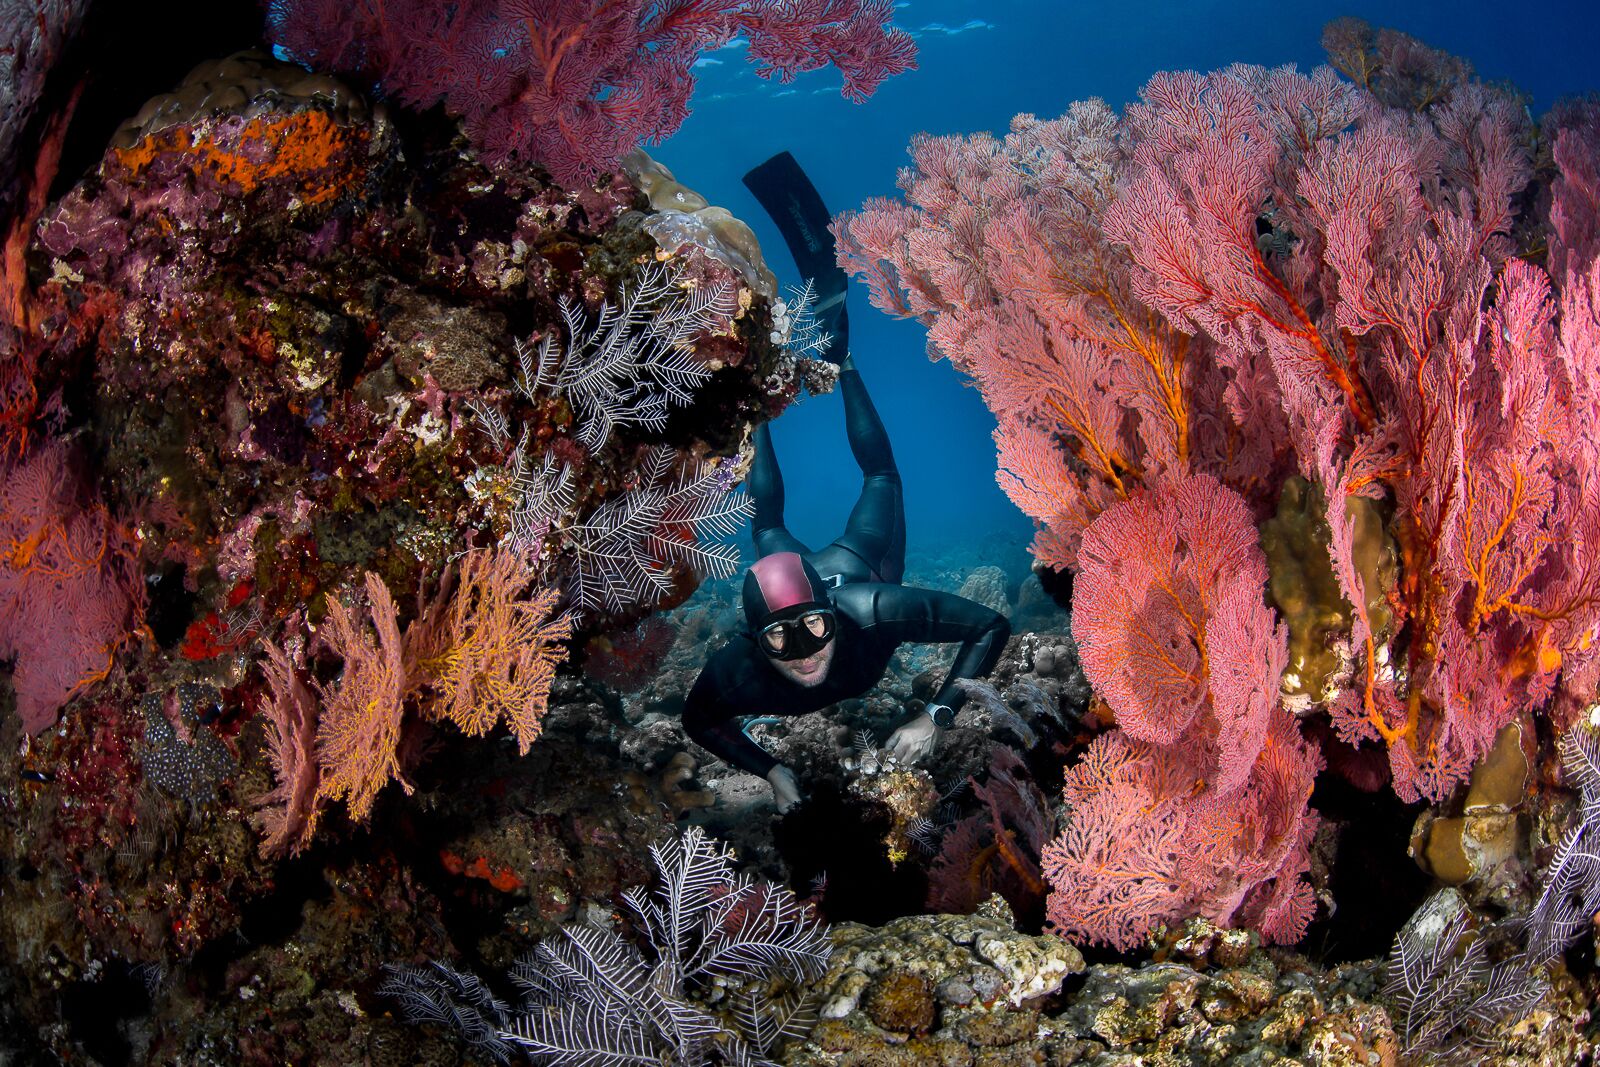 A freediver between coral reefs in Bali